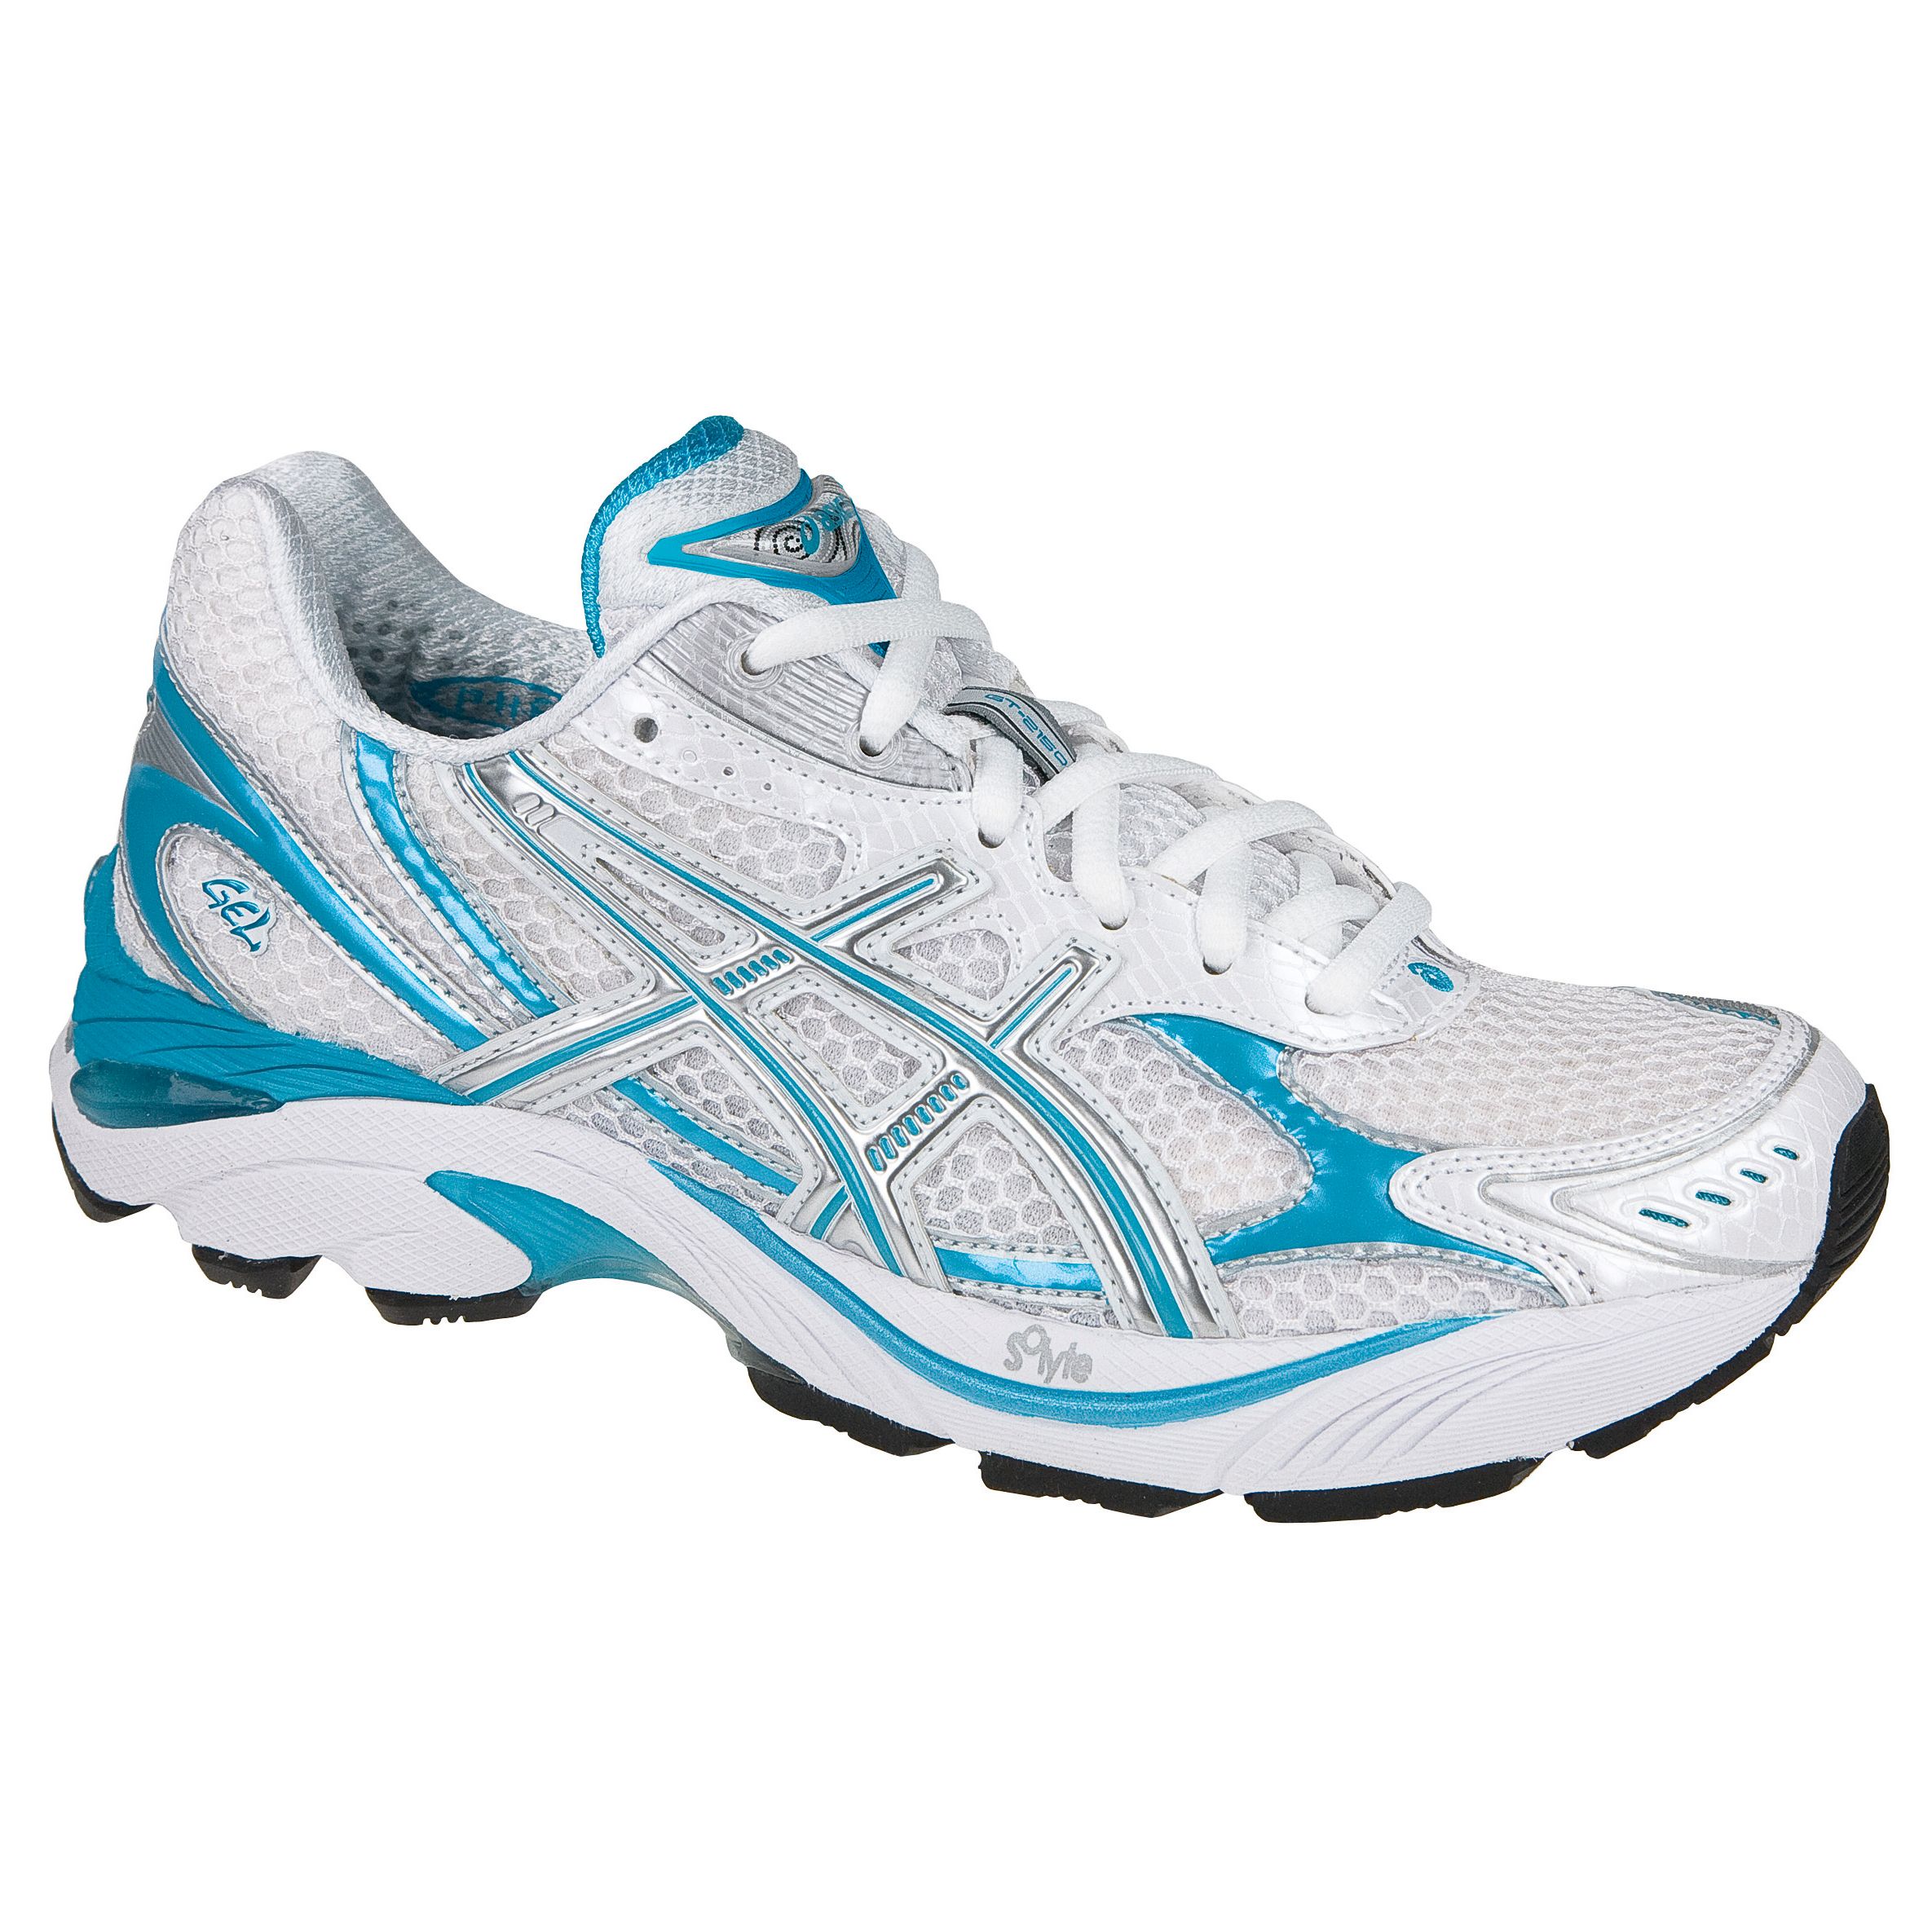 GT2150 Running Shoes, White/Blue